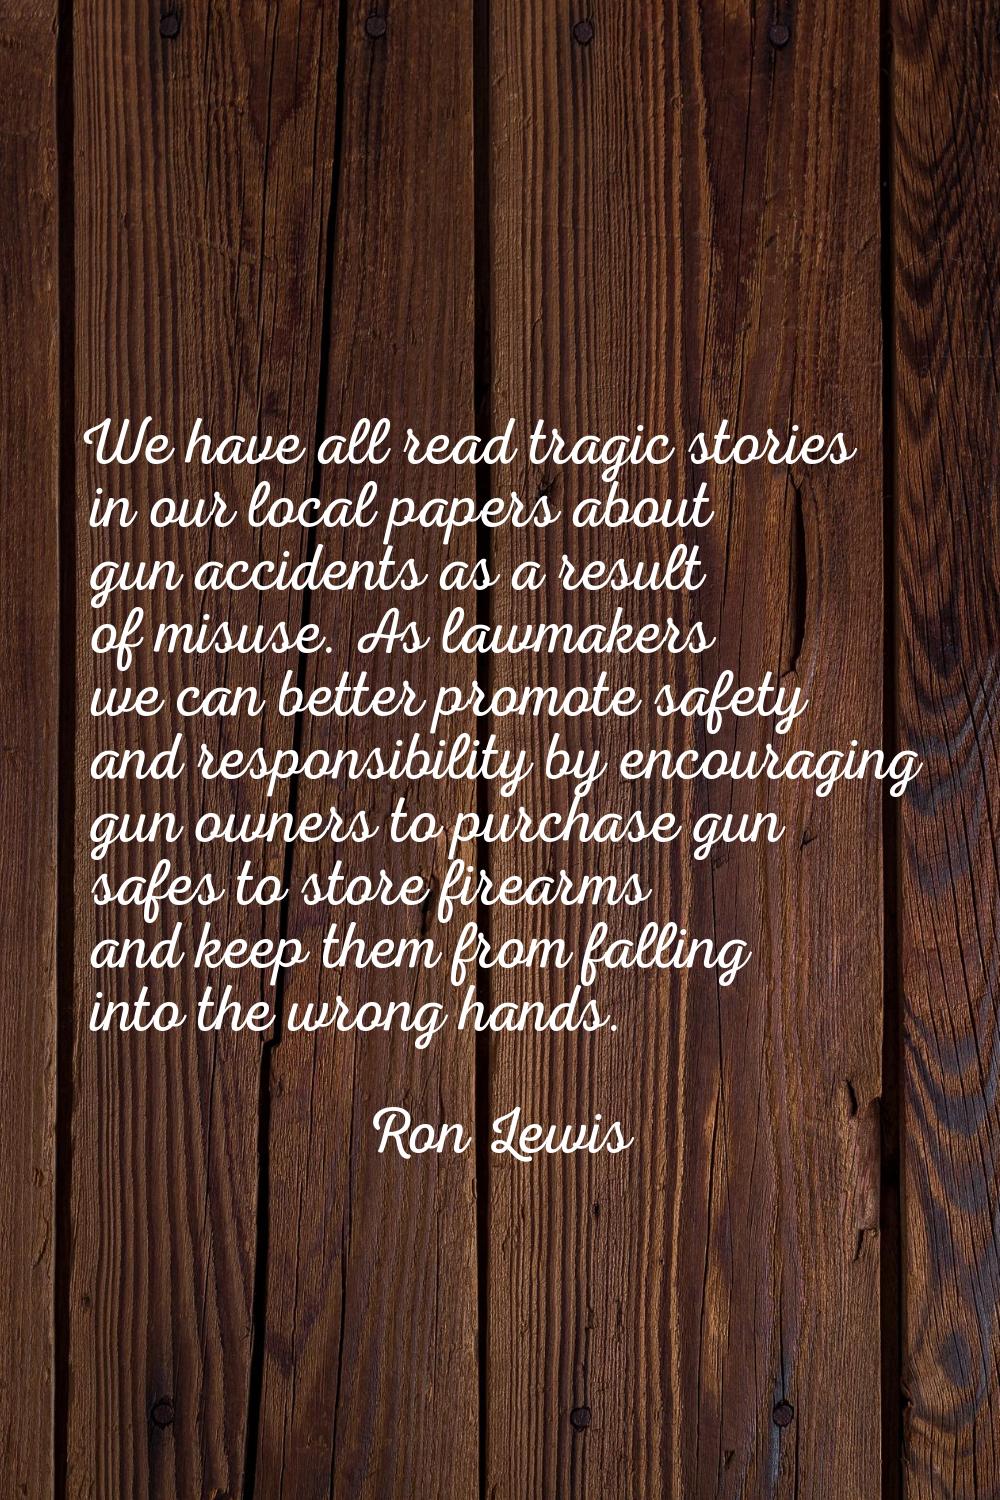 We have all read tragic stories in our local papers about gun accidents as a result of misuse. As l